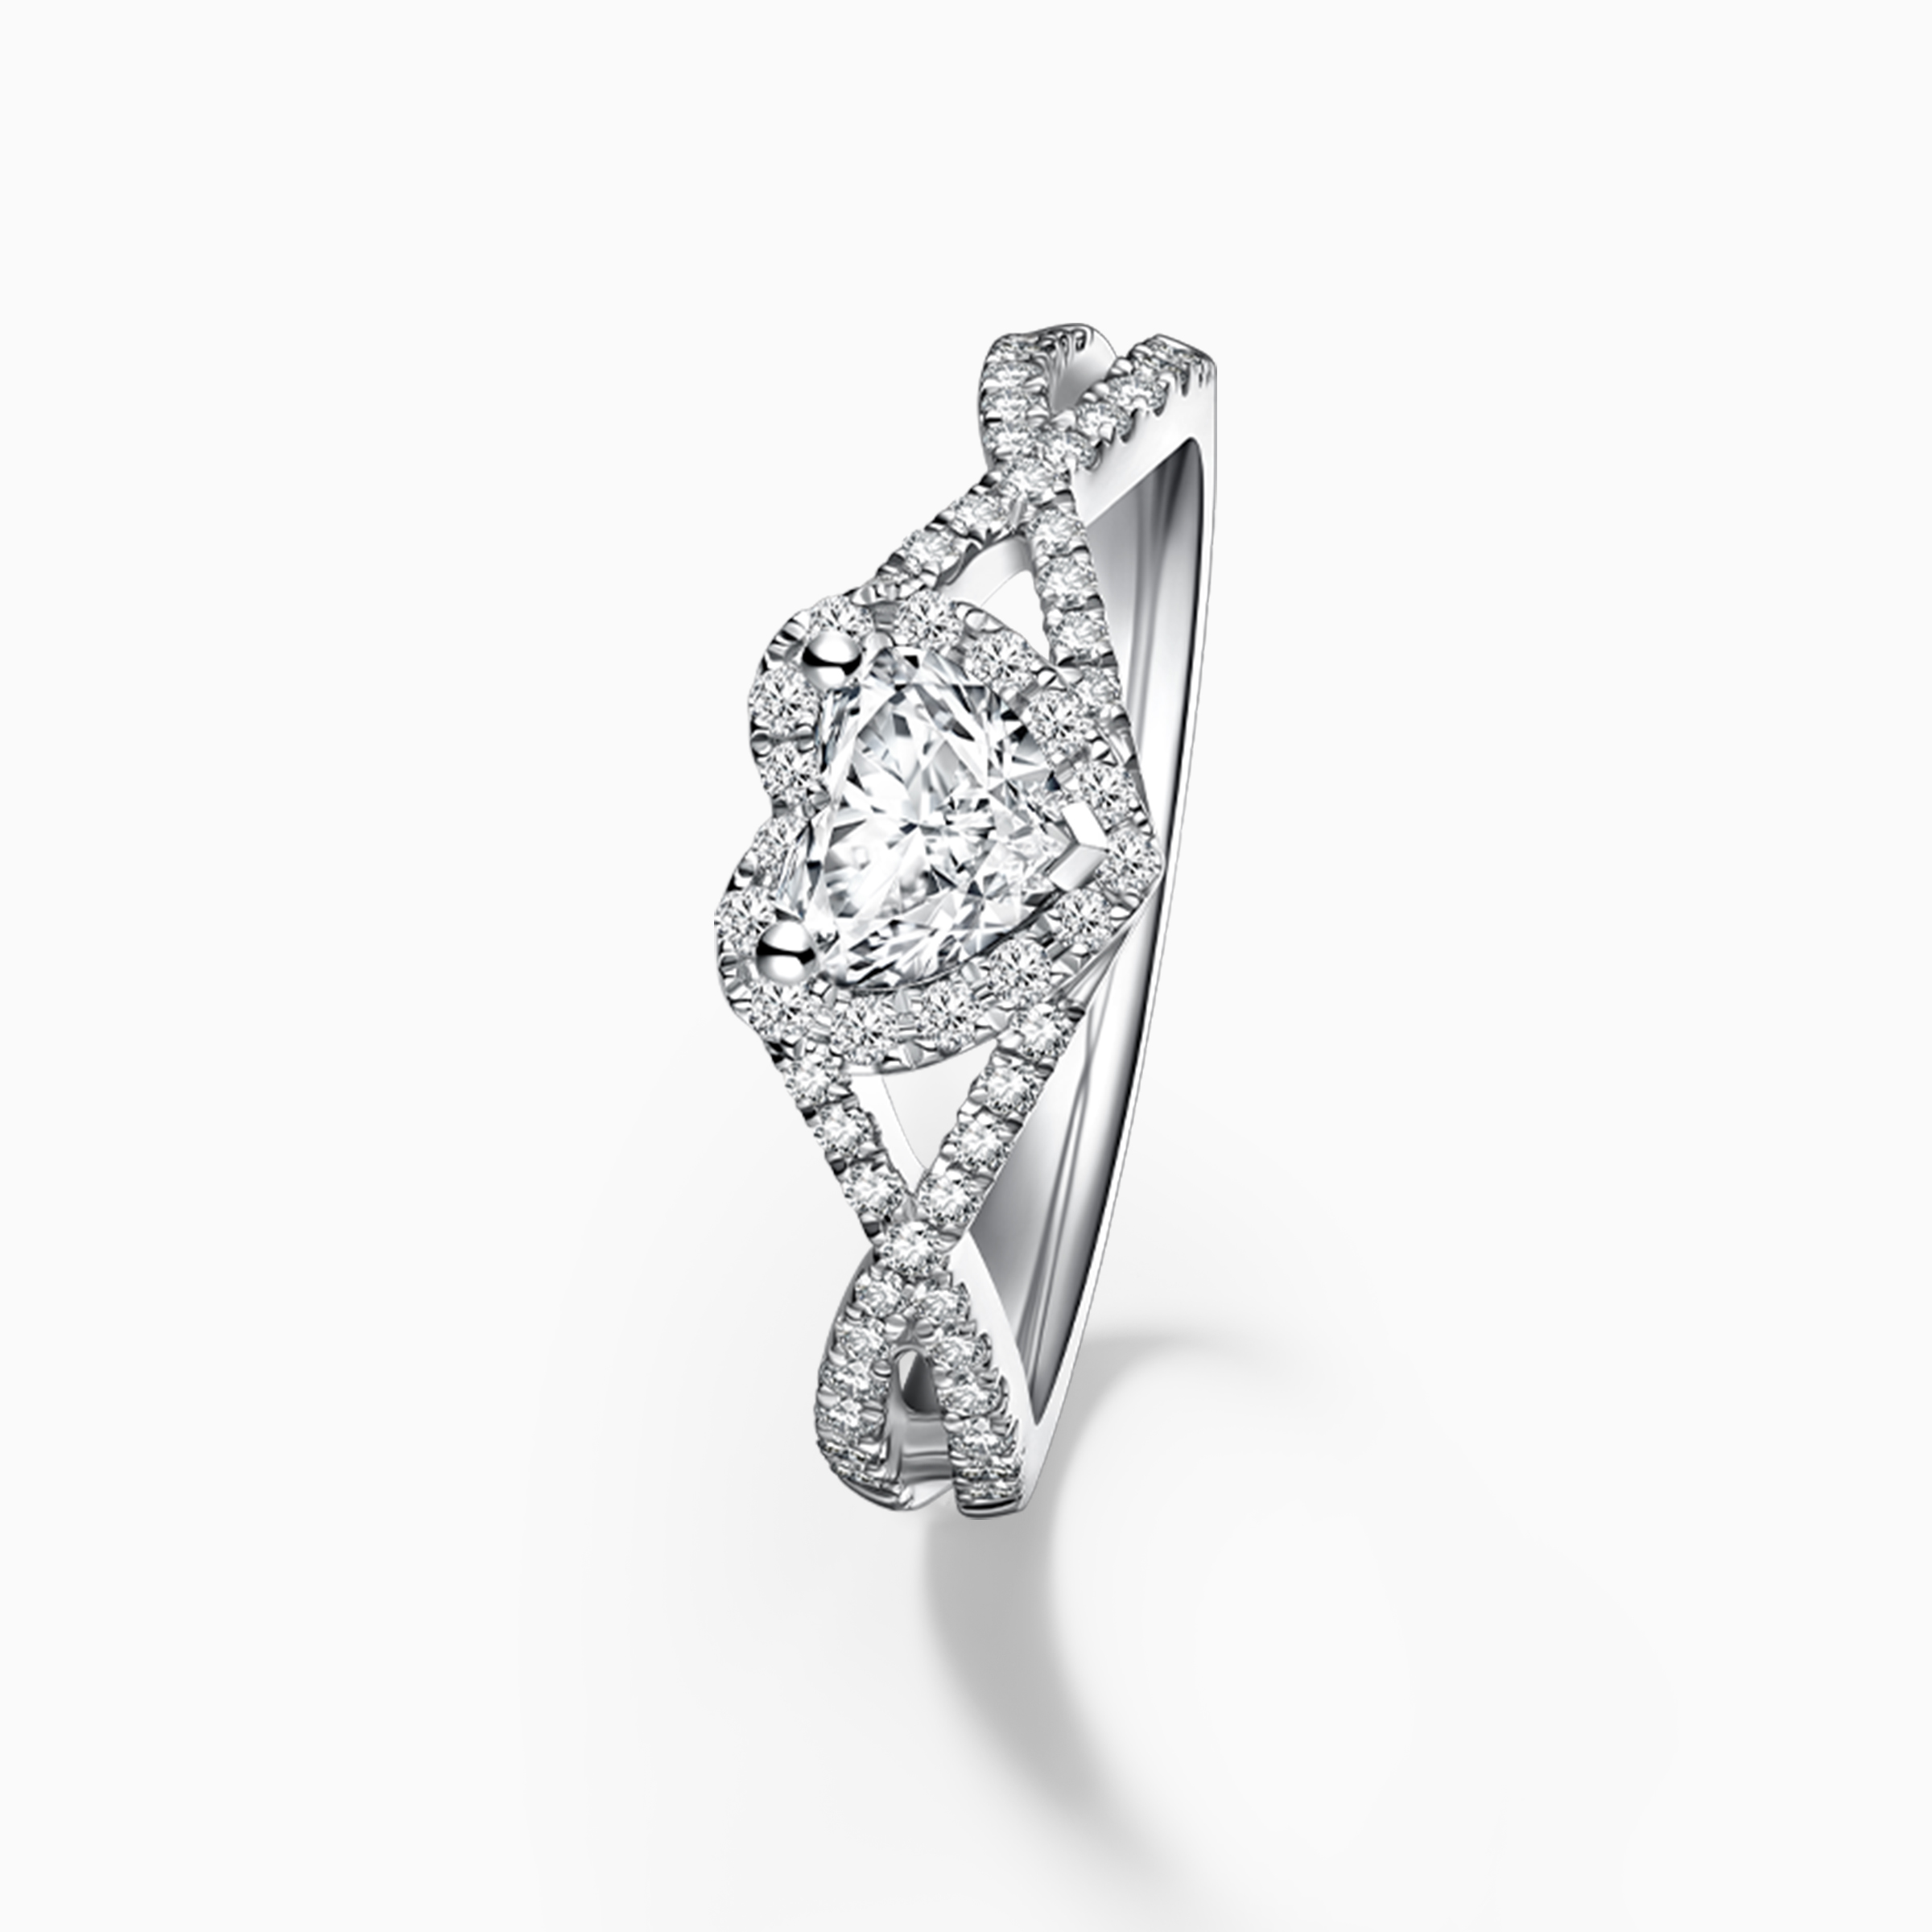 Darry Ring halo diamond engagement ring side view